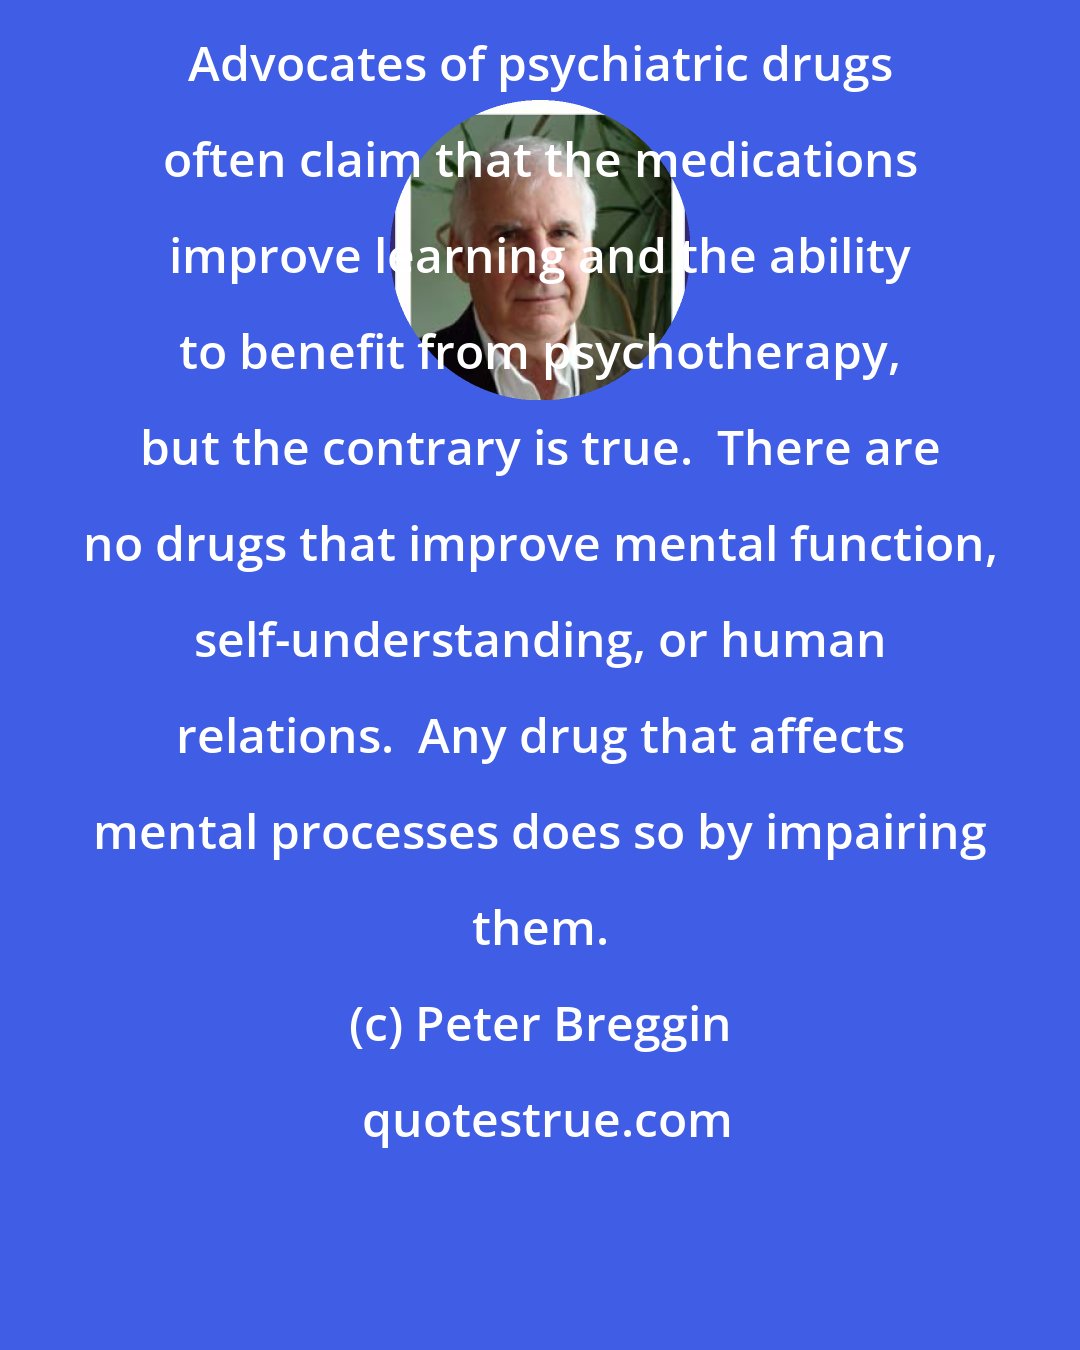 Peter Breggin: Advocates of psychiatric drugs often claim that the medications improve learning and the ability to benefit from psychotherapy, but the contrary is true.  There are no drugs that improve mental function, self-understanding, or human relations.  Any drug that affects mental processes does so by impairing them.